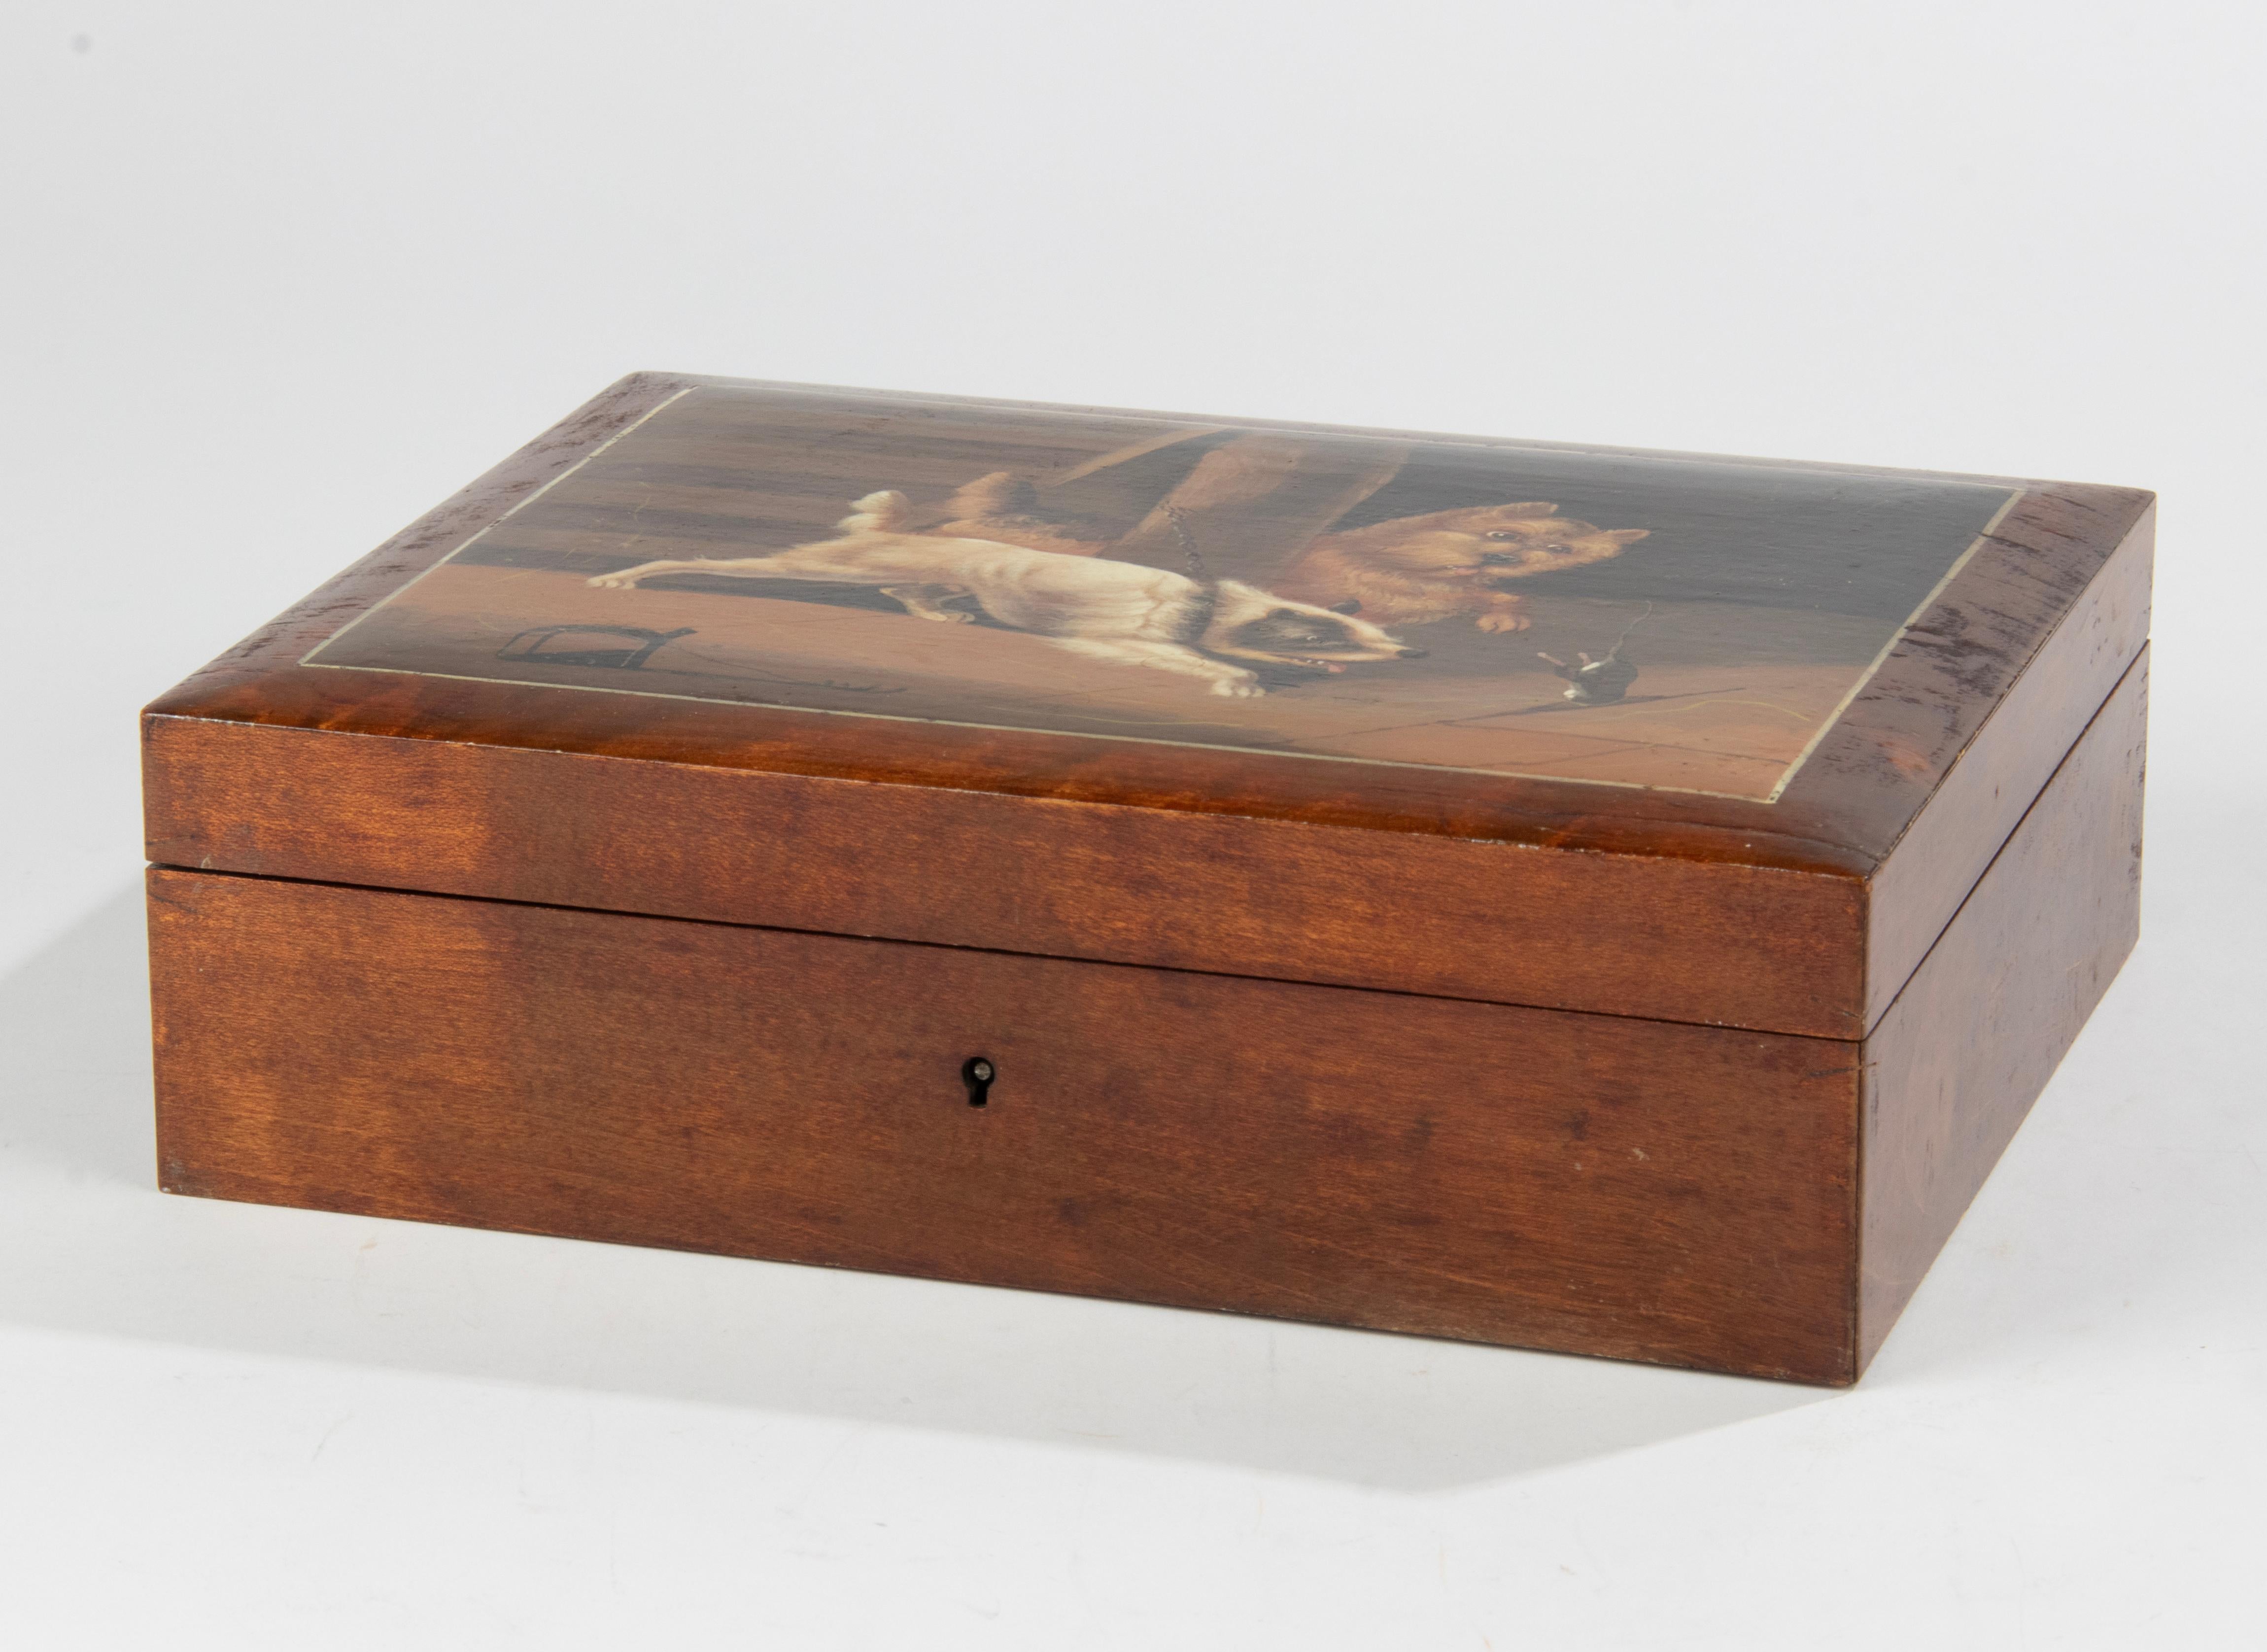 Belle Époque Late 19th Century Decorative Box with Dog Painting Lid For Sale